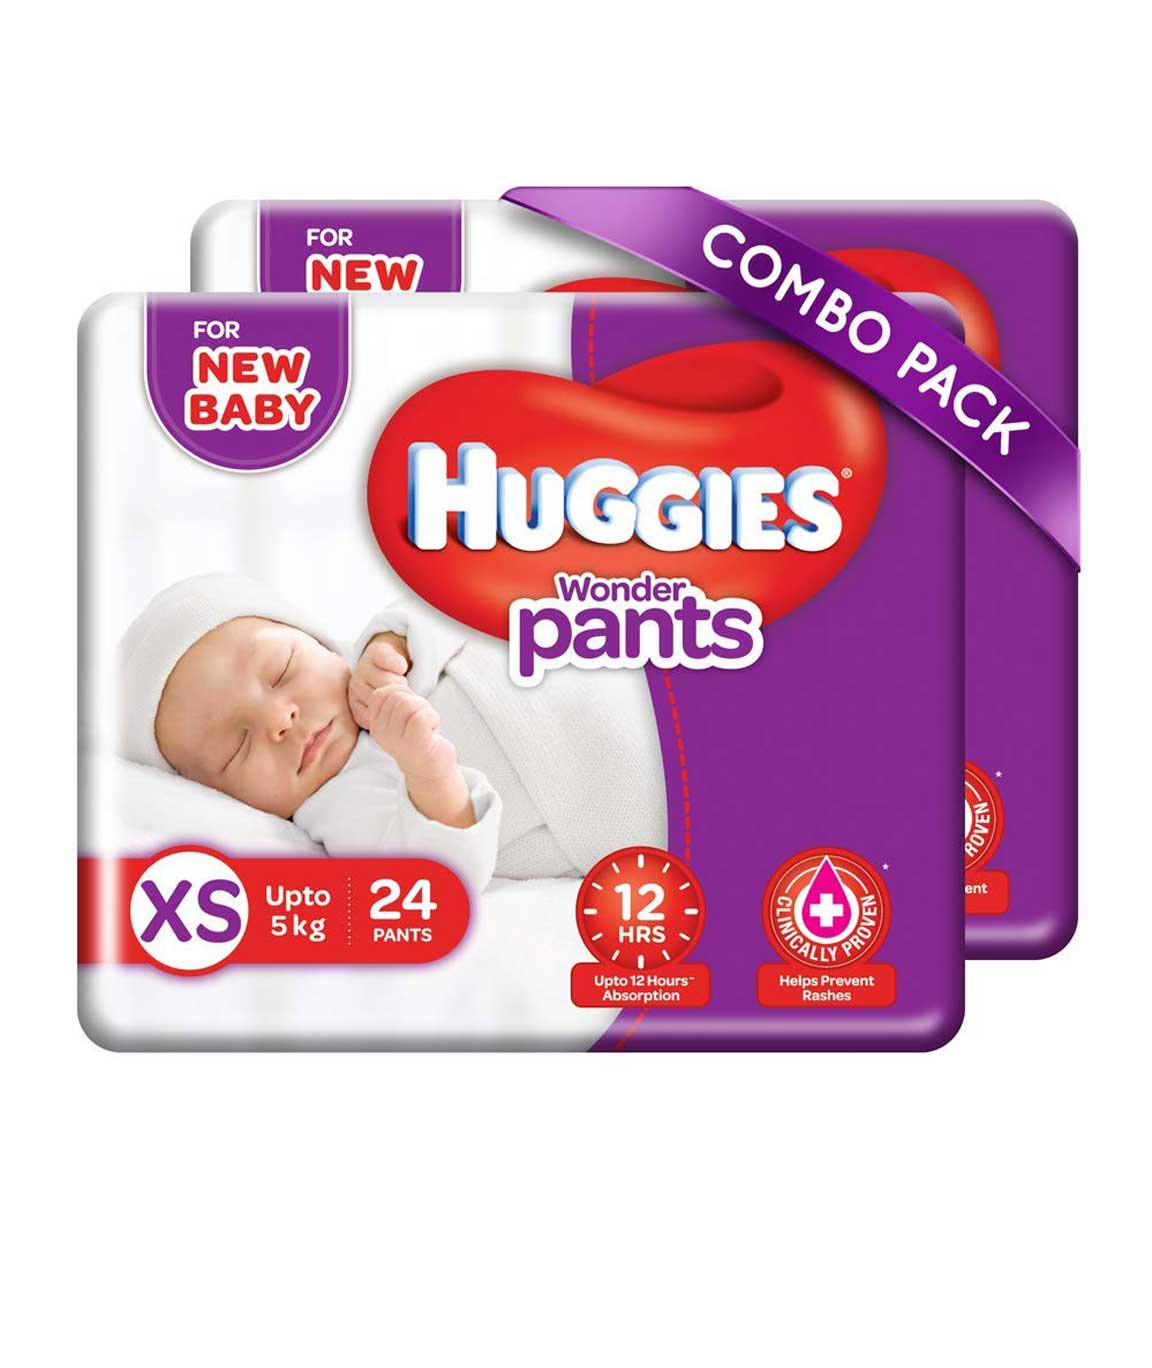 Huggies Wonder Pants Extra Large (XL) Size Baby Diaper Pants 44 Count | eBay-cheohanoi.vn